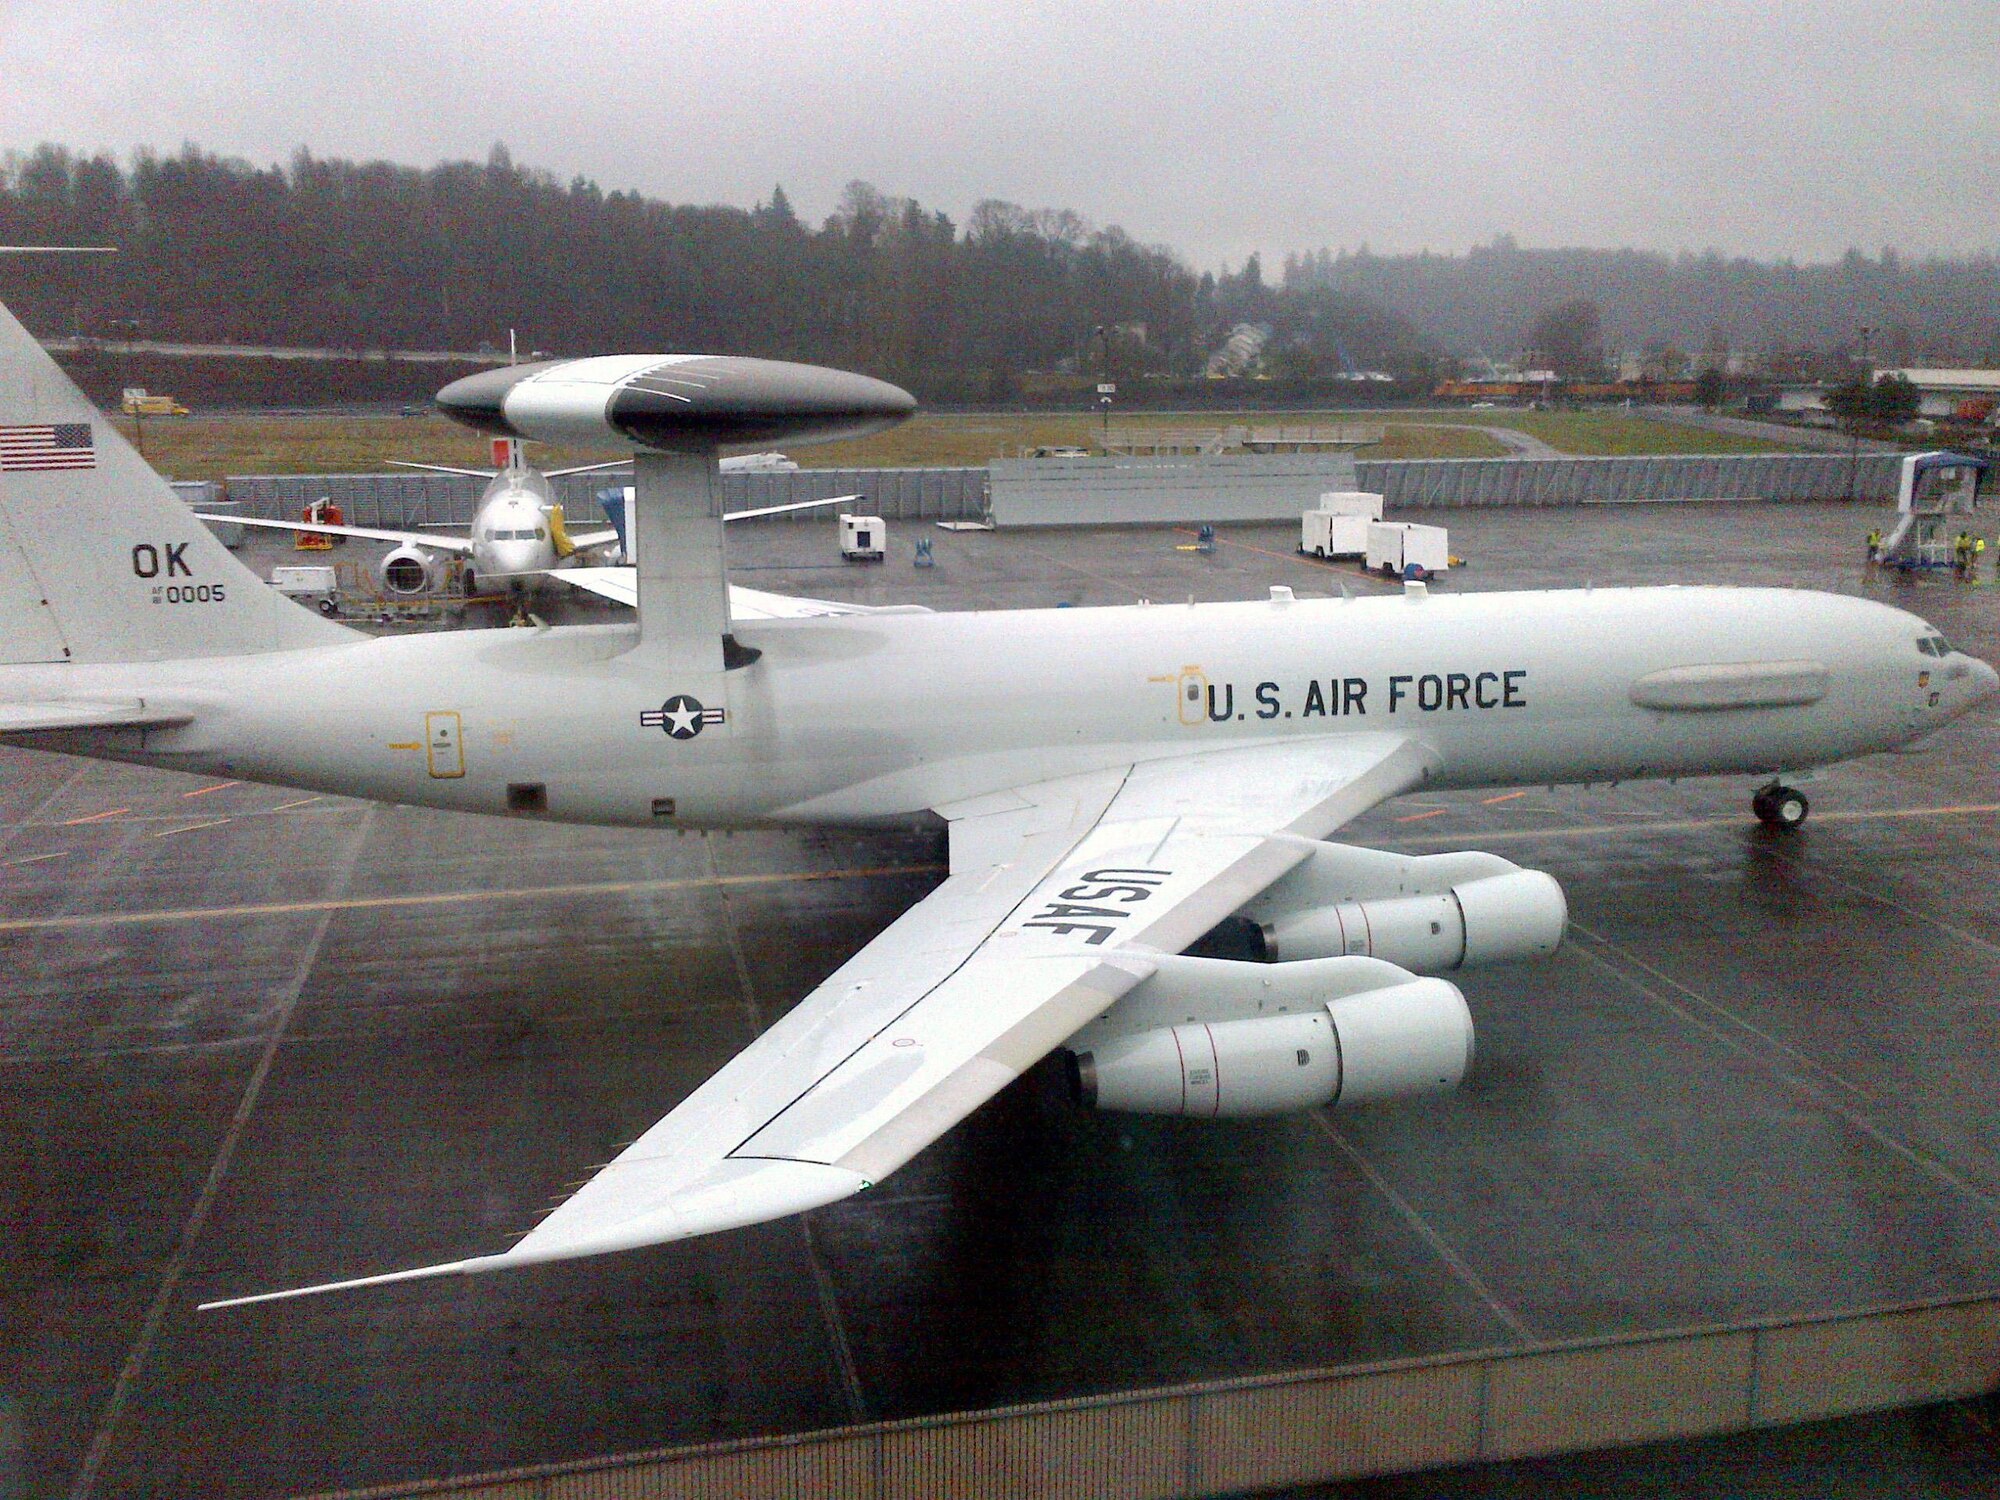 An E-3G Sentry airborne warning and control system aircraft equipped with the Block 40/45 upgrade taxis down a runway at Boeing Field in Seattle on a recent mission. The AWACS is a platform that provides airborne, command and control, all-weather surveillance and communications to the U.S. and its Coalition partners. (United States Air Force photo)